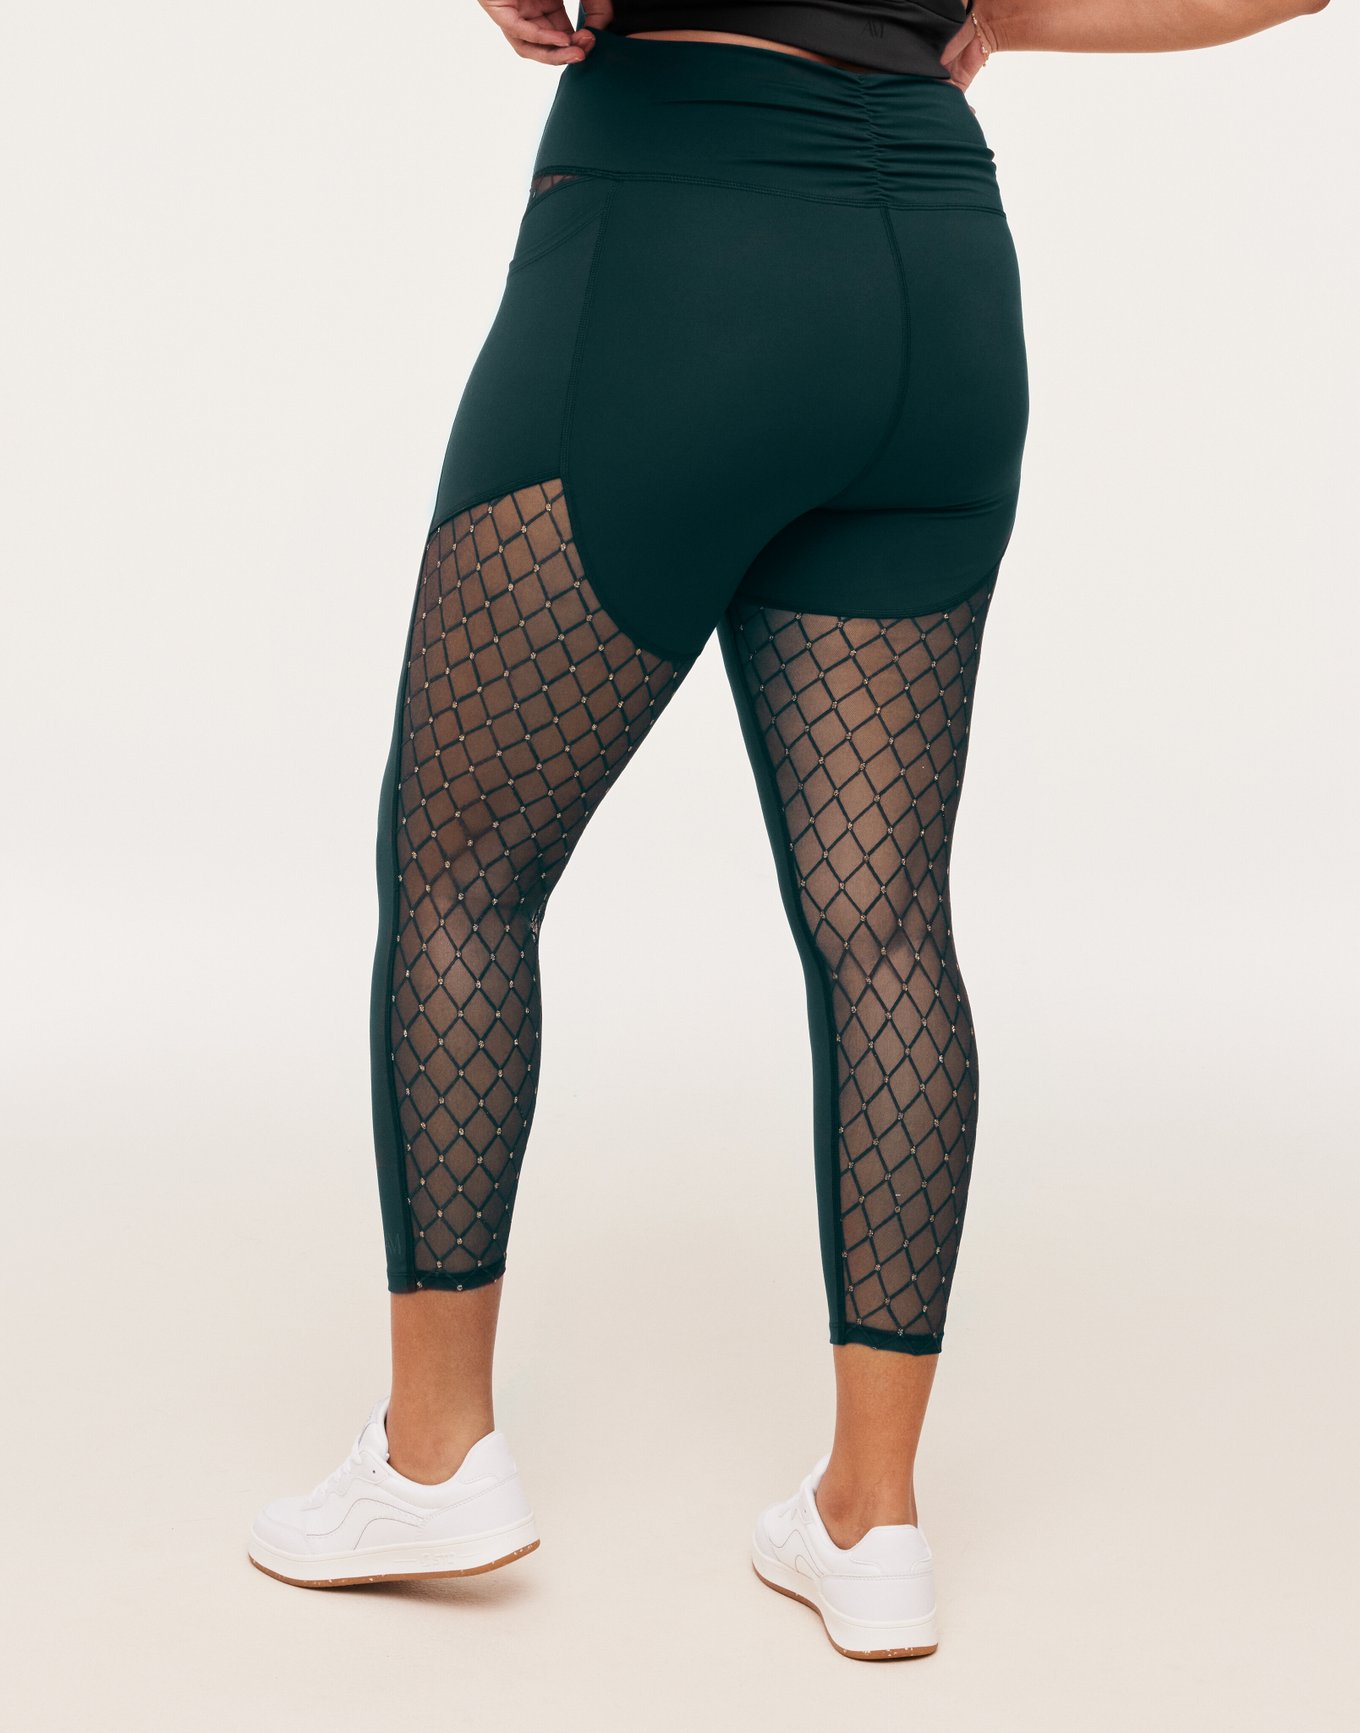 Breathable & Anti-Bacterial women crotchless tights 